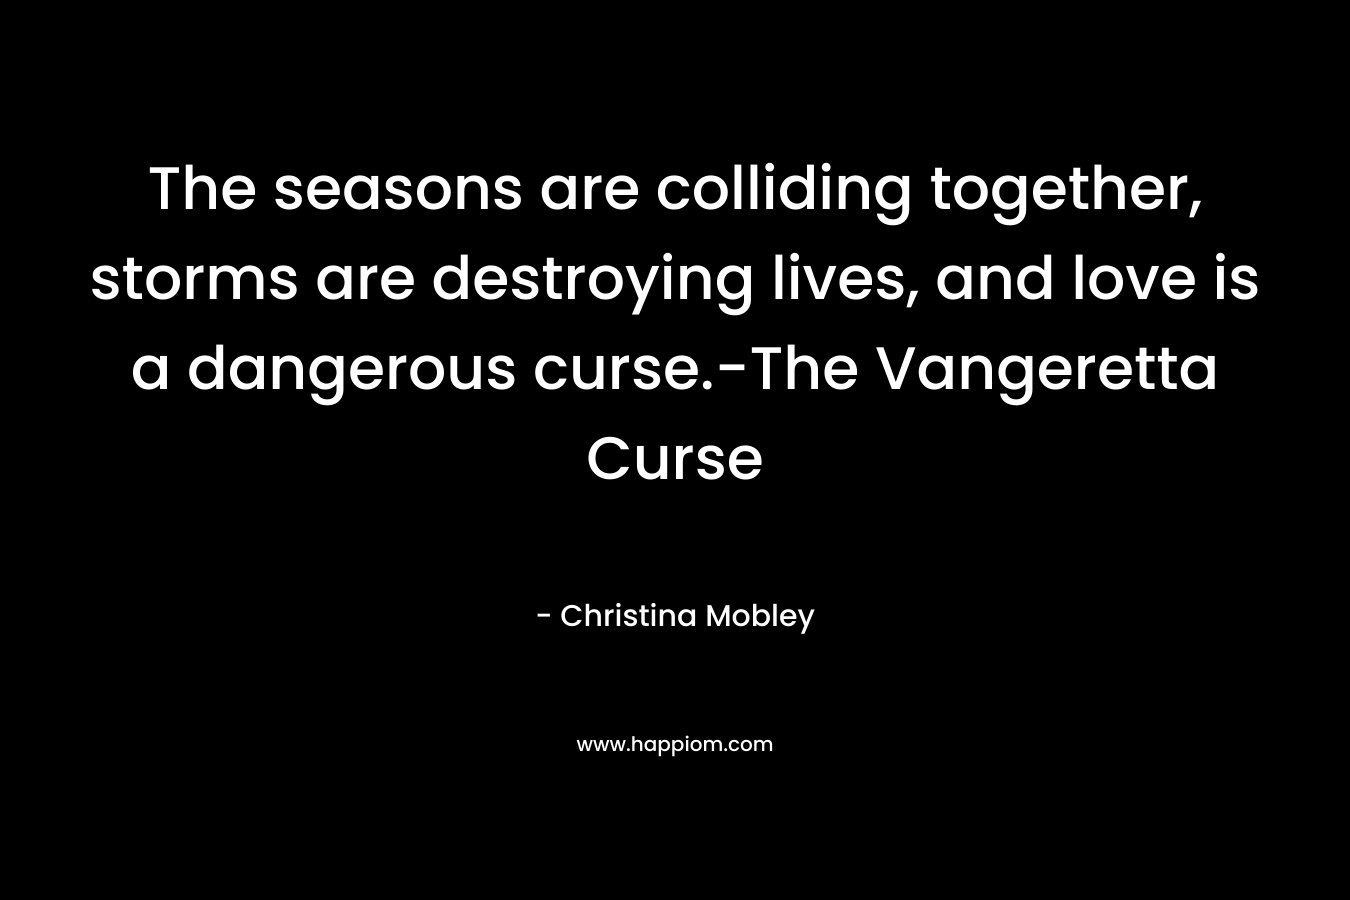 The seasons are colliding together, storms are destroying lives, and love is a dangerous curse.-The Vangeretta Curse